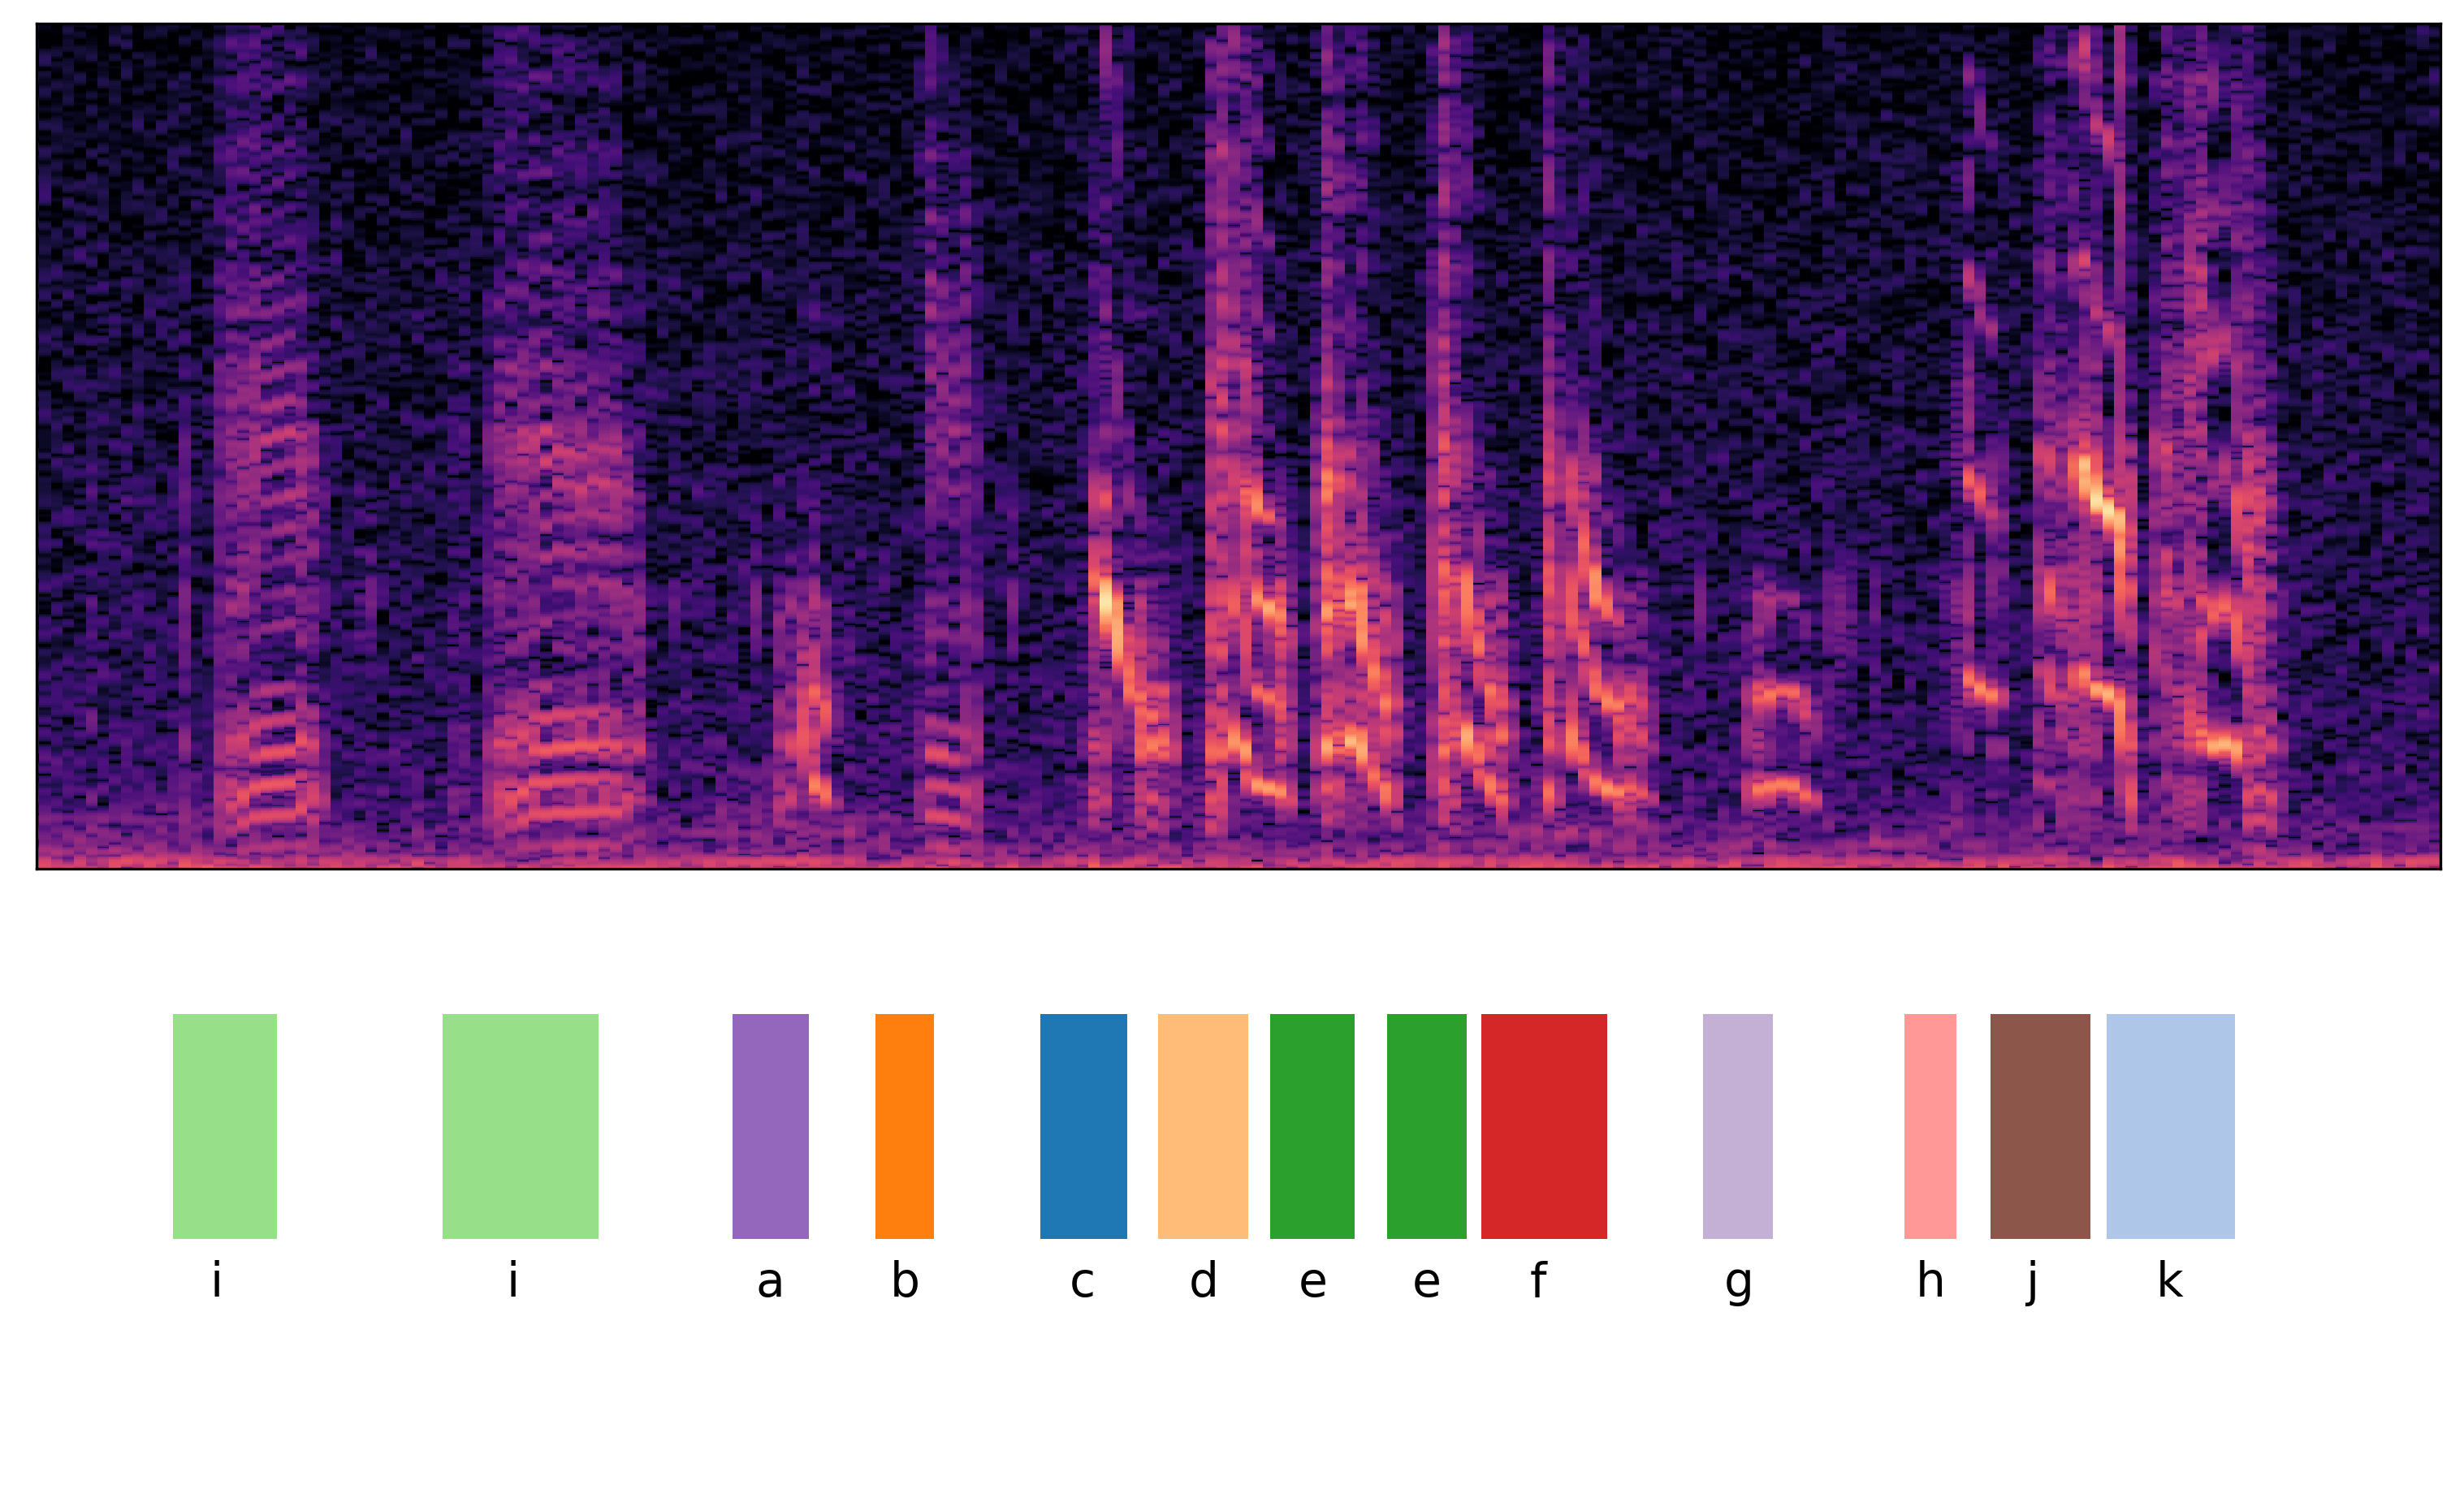 Spectrogram showing snippet of Bengalese finch song with annotated syllables, for bird with ID gy6or6